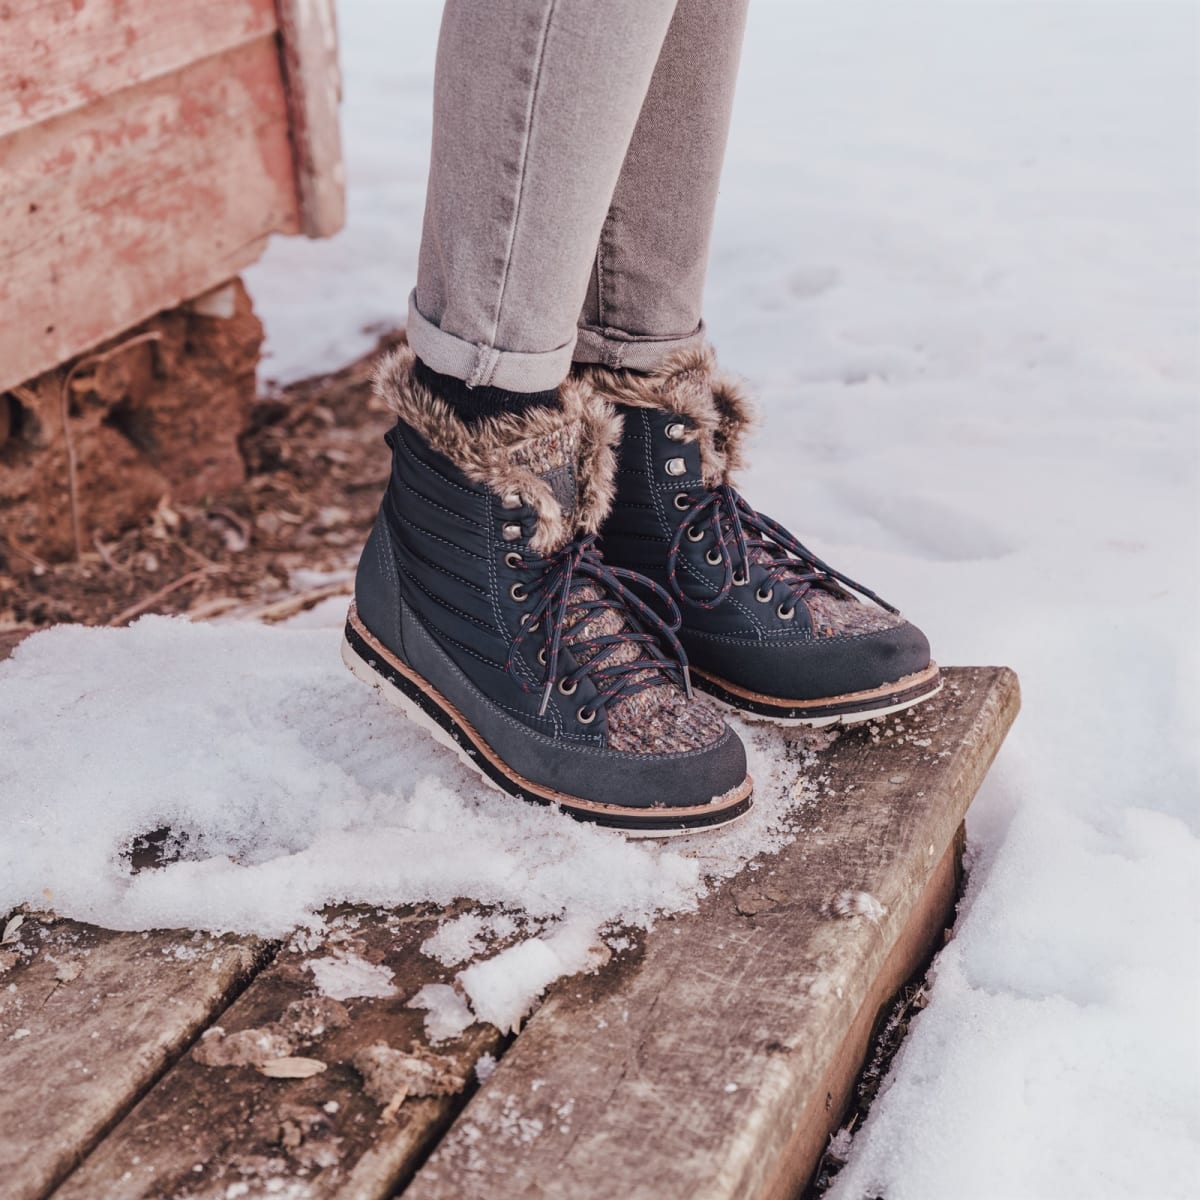 MUK LUKS Women's Boots Only $42.99 + FREE Shipping! - Become a Coupon Queen